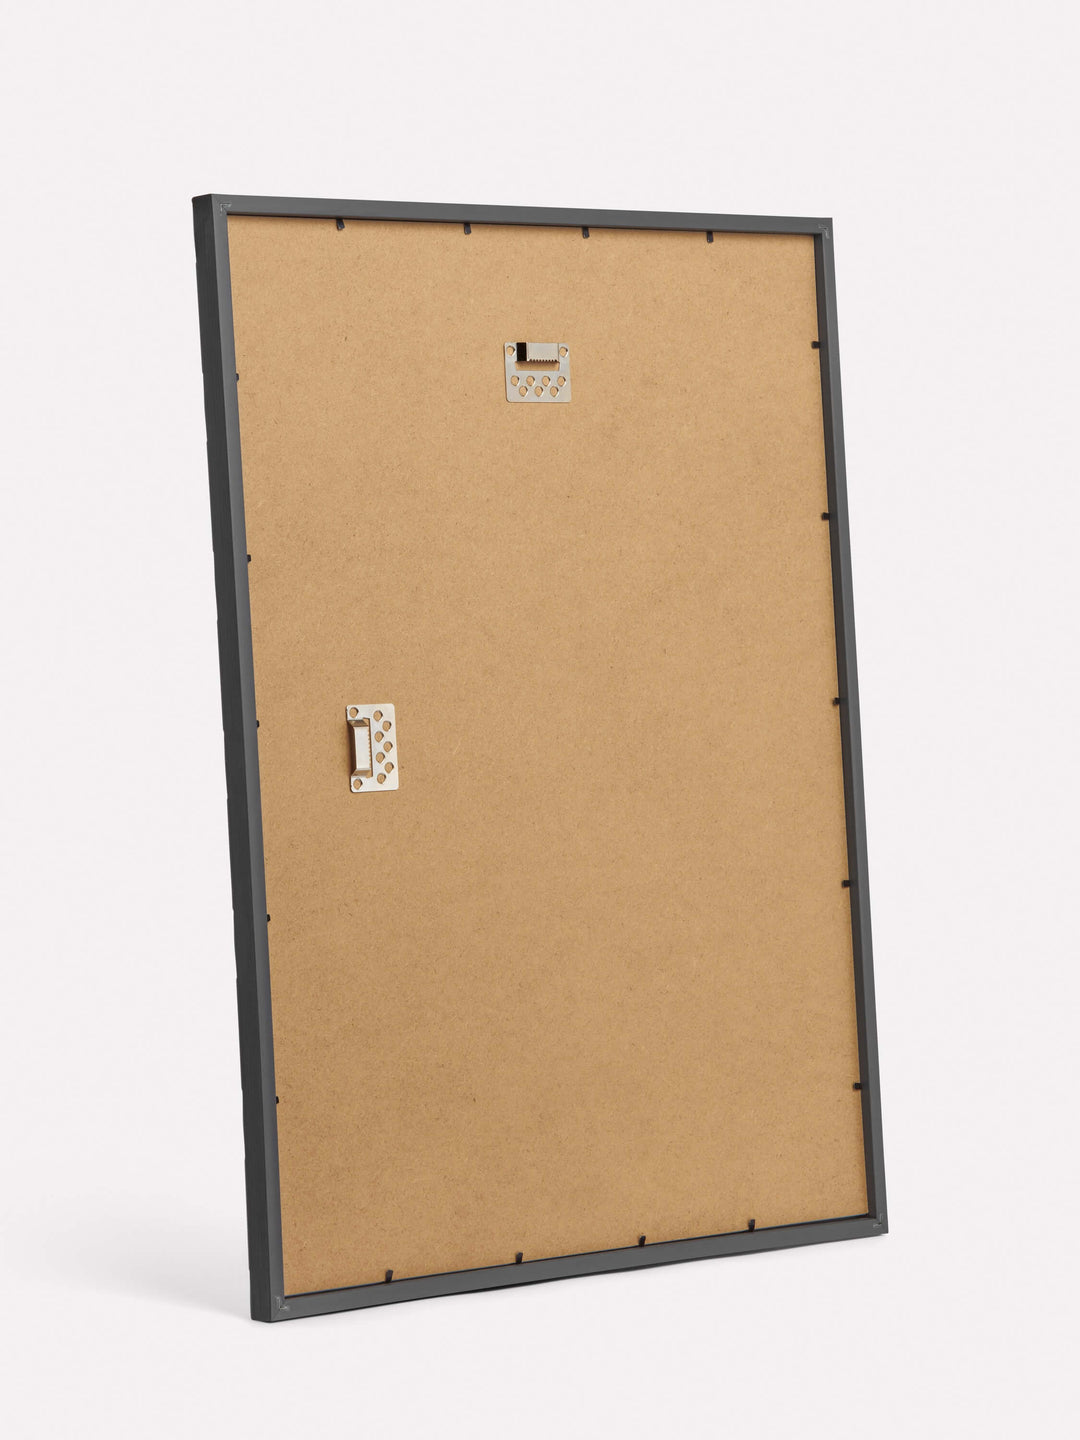 18x24-inch Bamboo Frame, Black - Back view